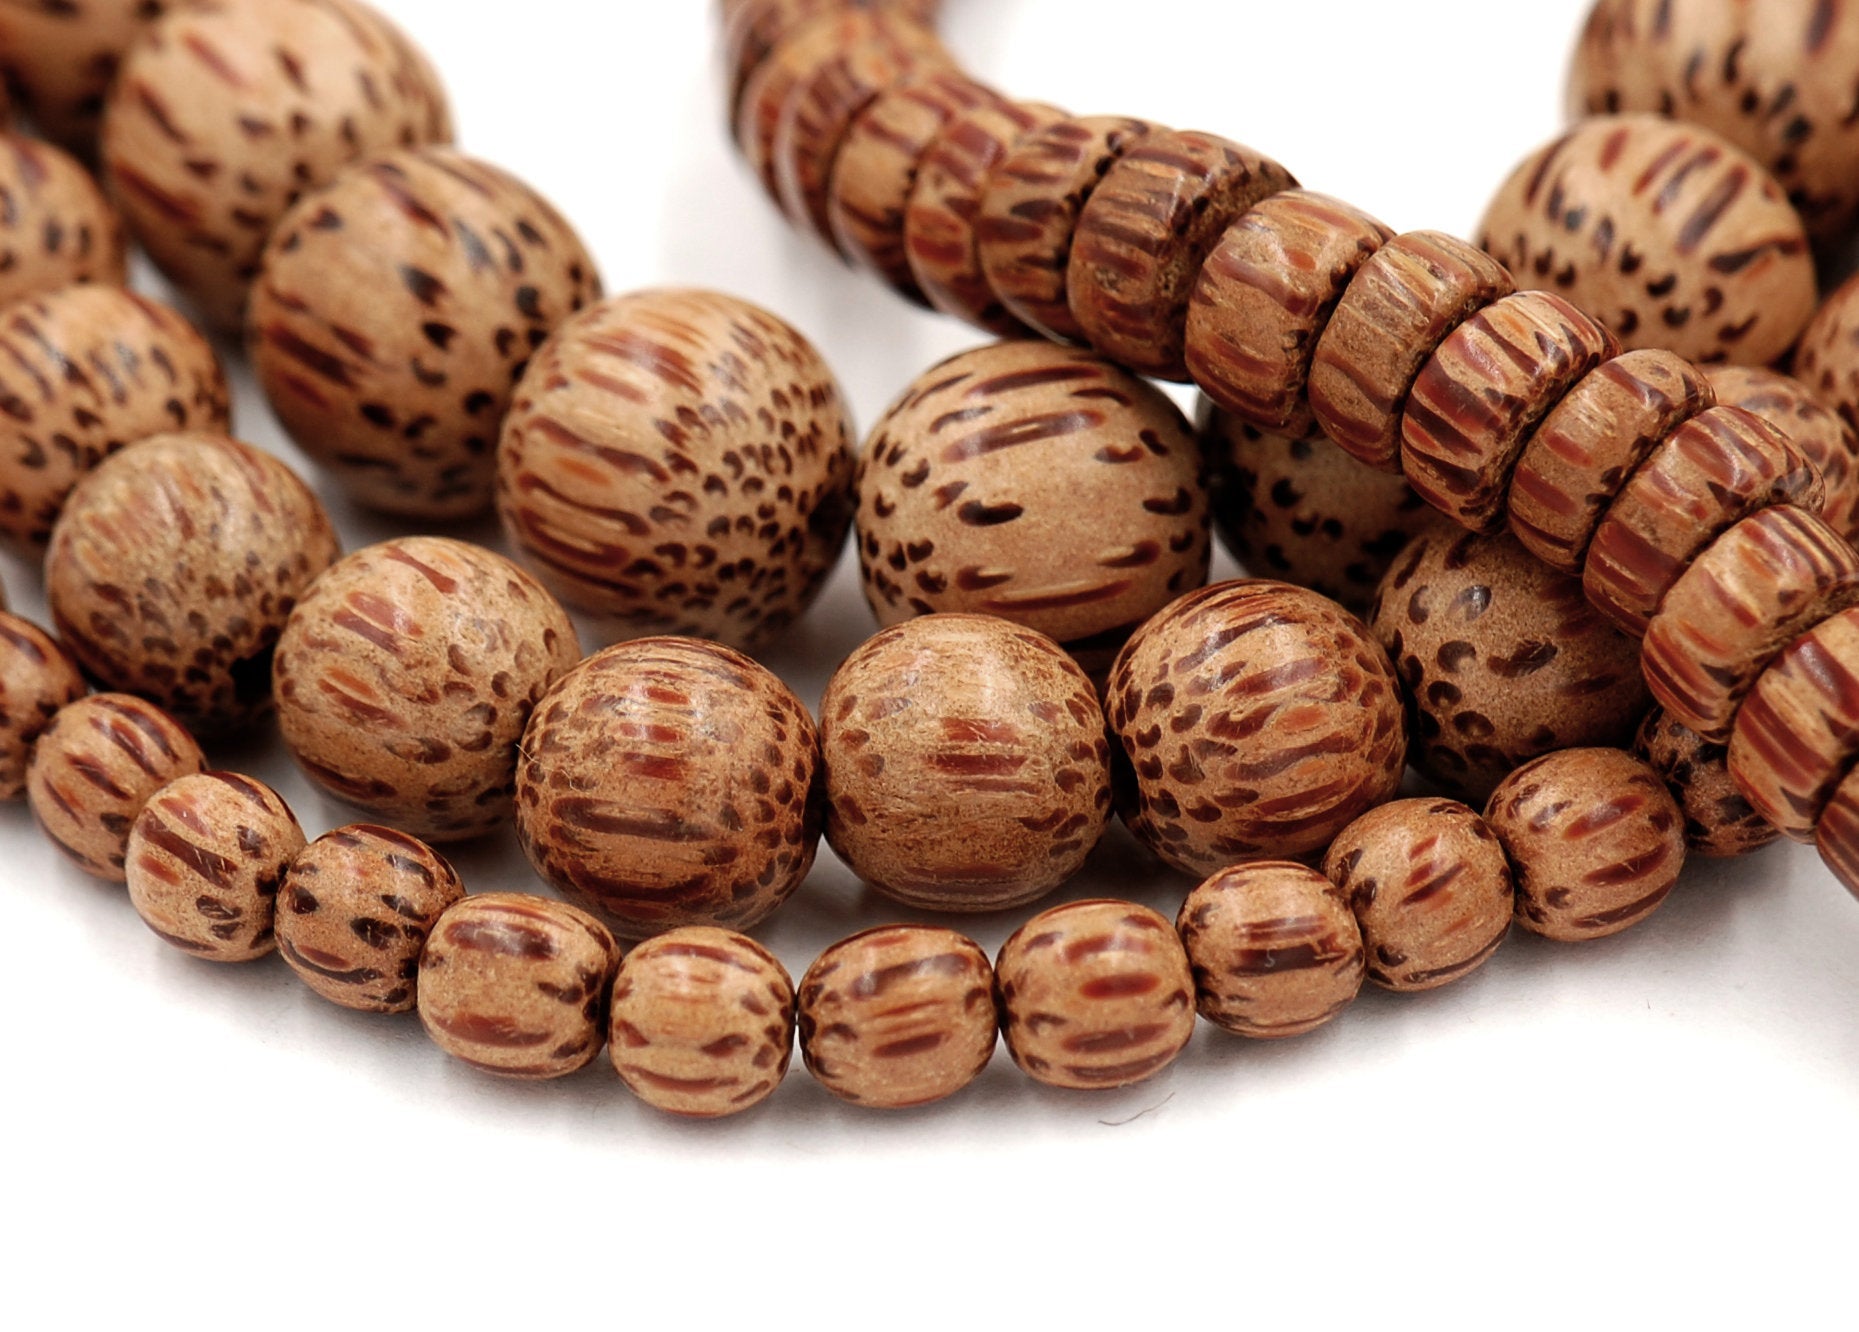 Palmwood Beads 4mm, 6mm, 8mm, 10mm Brown natural wood beads -15.5 inch strand